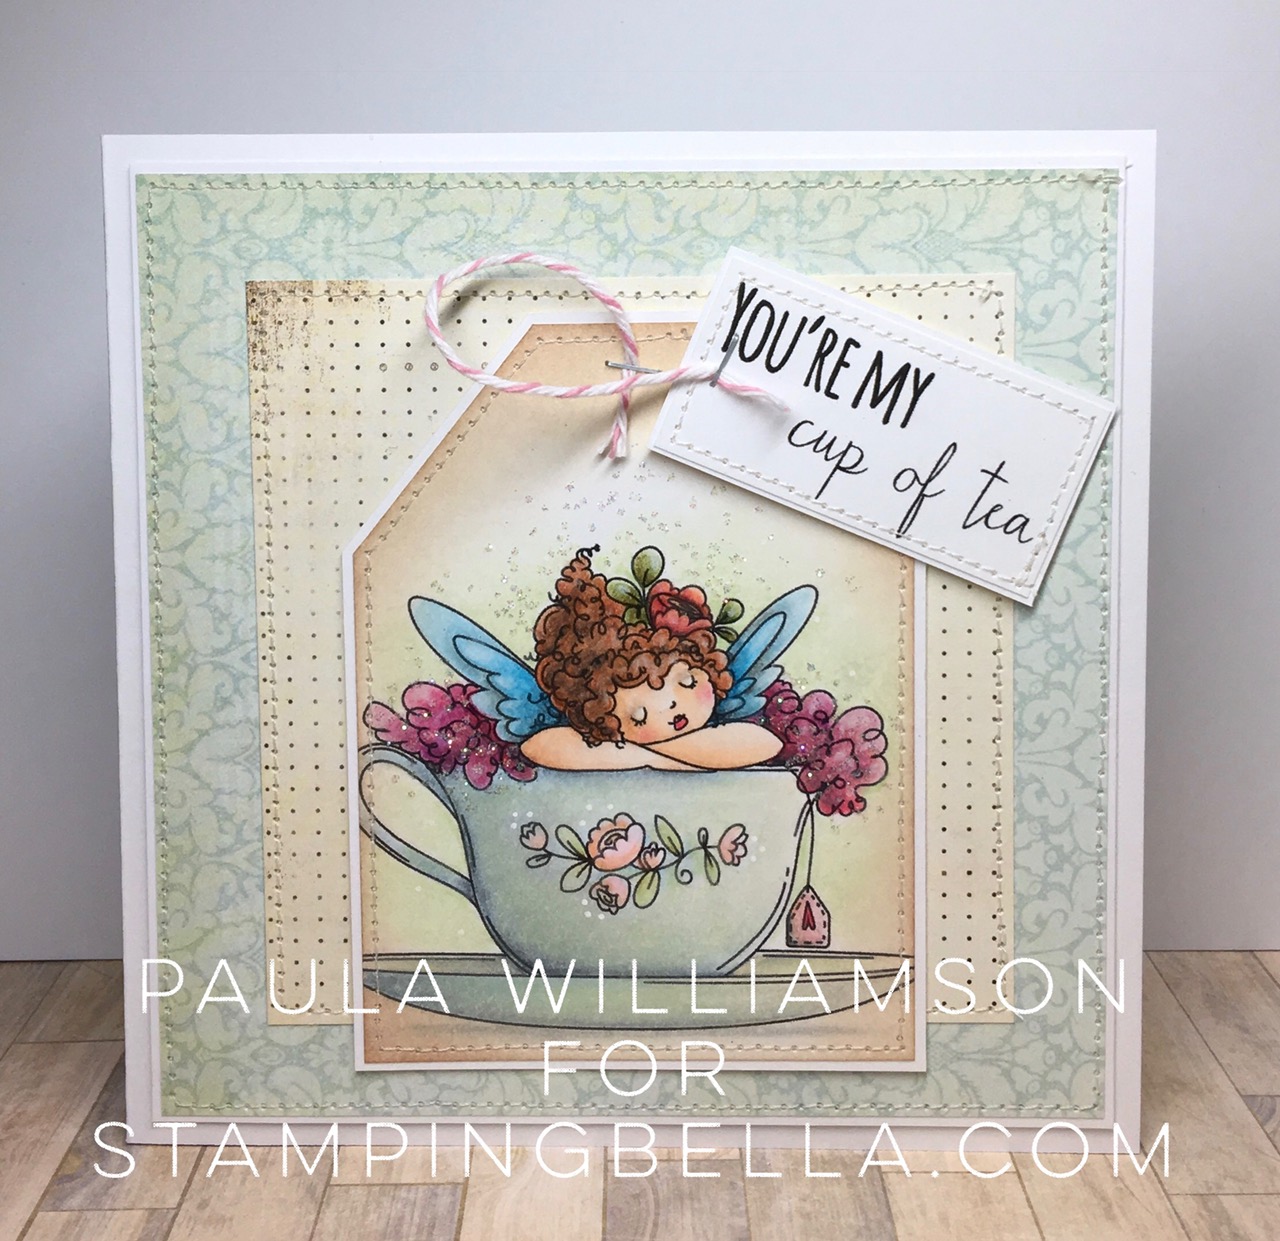 Stamping Bella JANUARY 2017 rubber stamp release-Edna's CUP OF TEA card by Paula Williamson